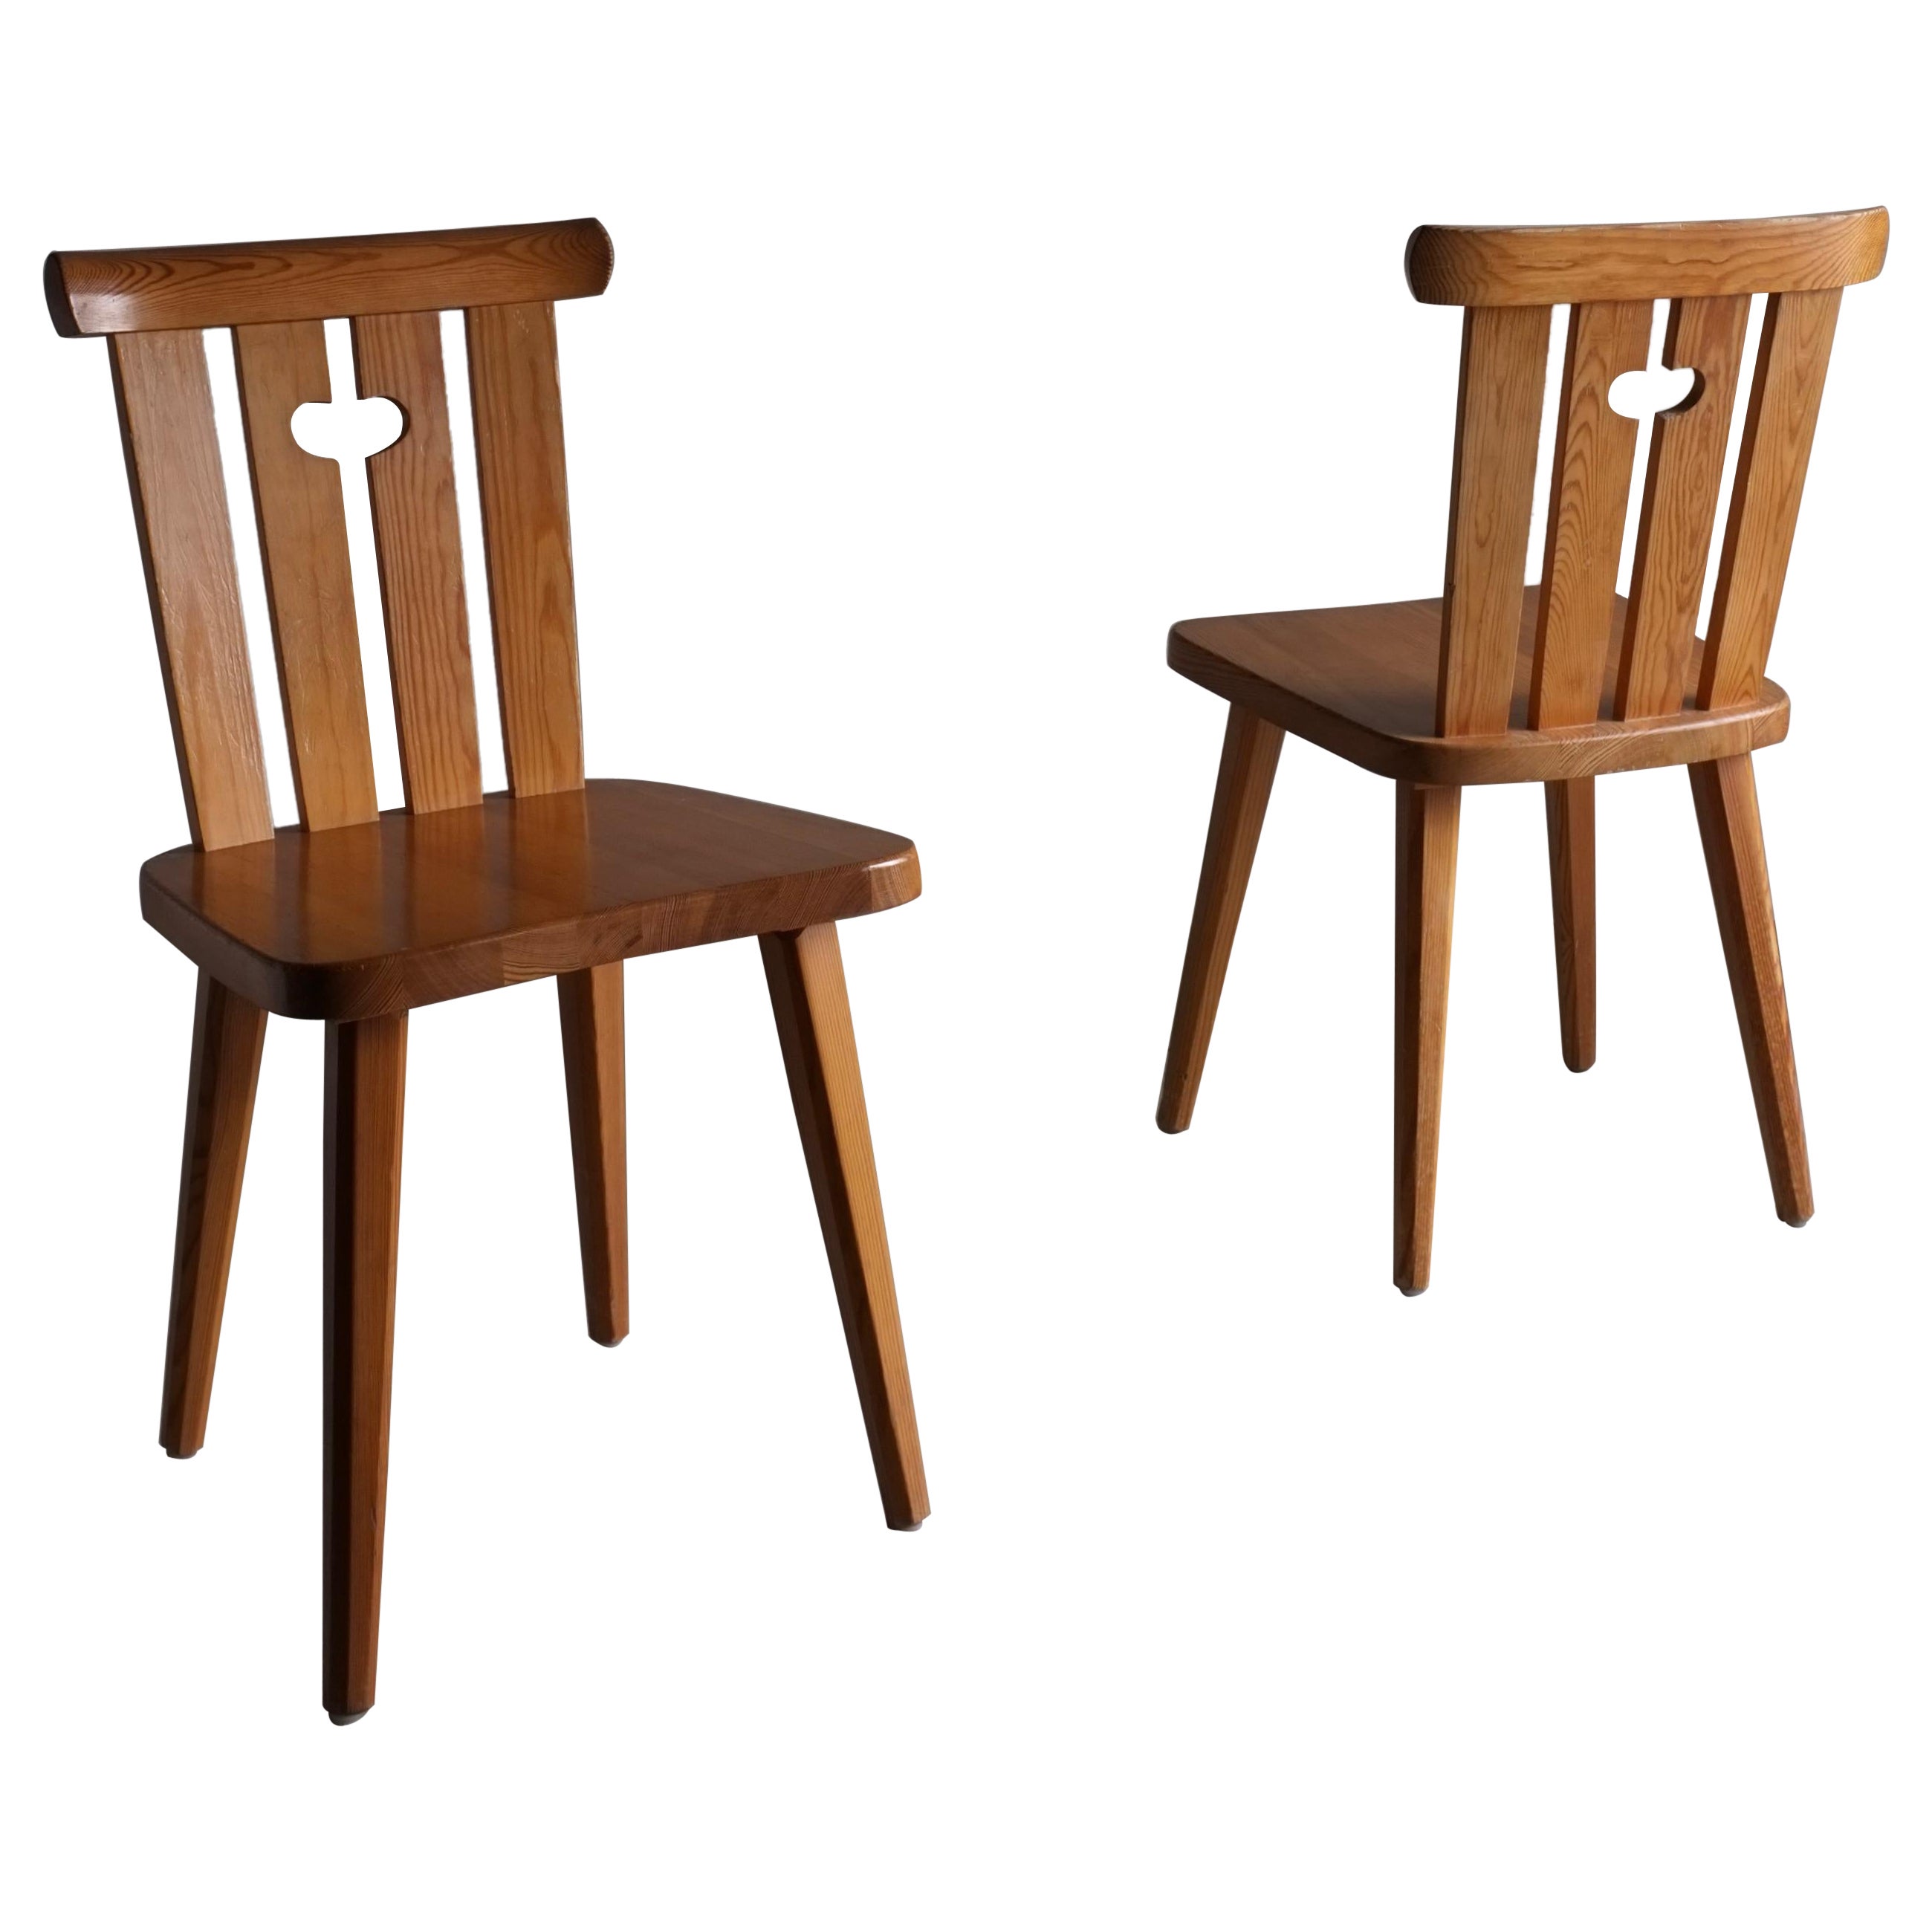 Set of 2 Solid Pine Chairs, Göran Malmvall, Sweden 1940s For Sale